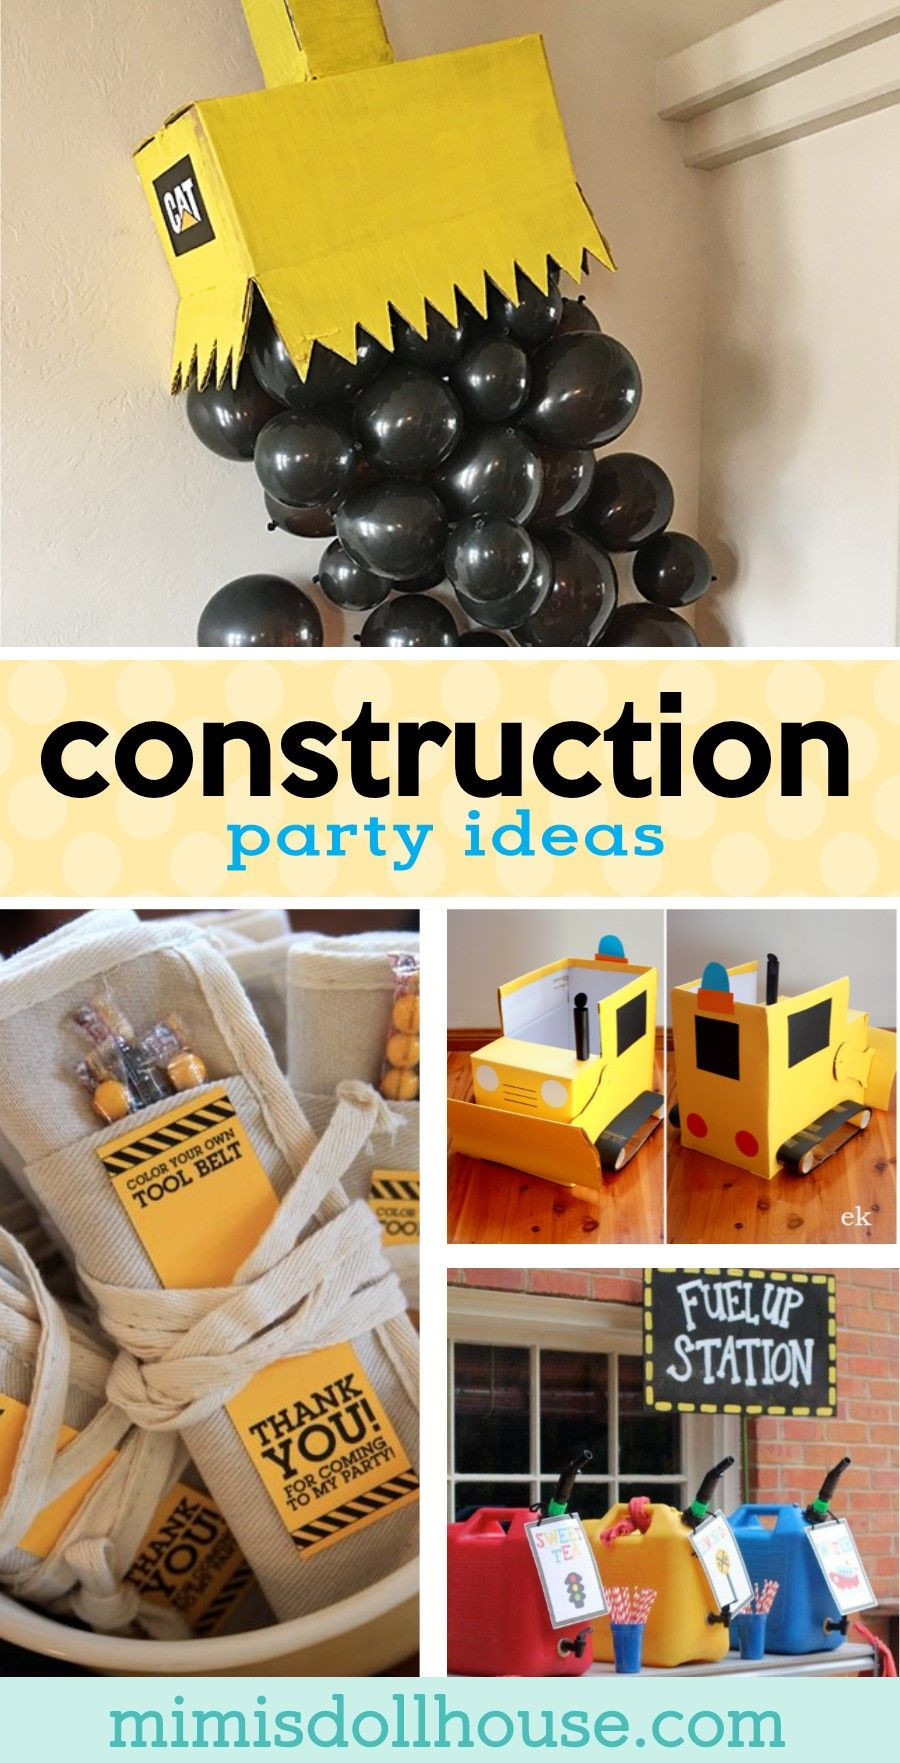 Construction Birthday Party Decorations
 Pin on Parties and Party Ideas